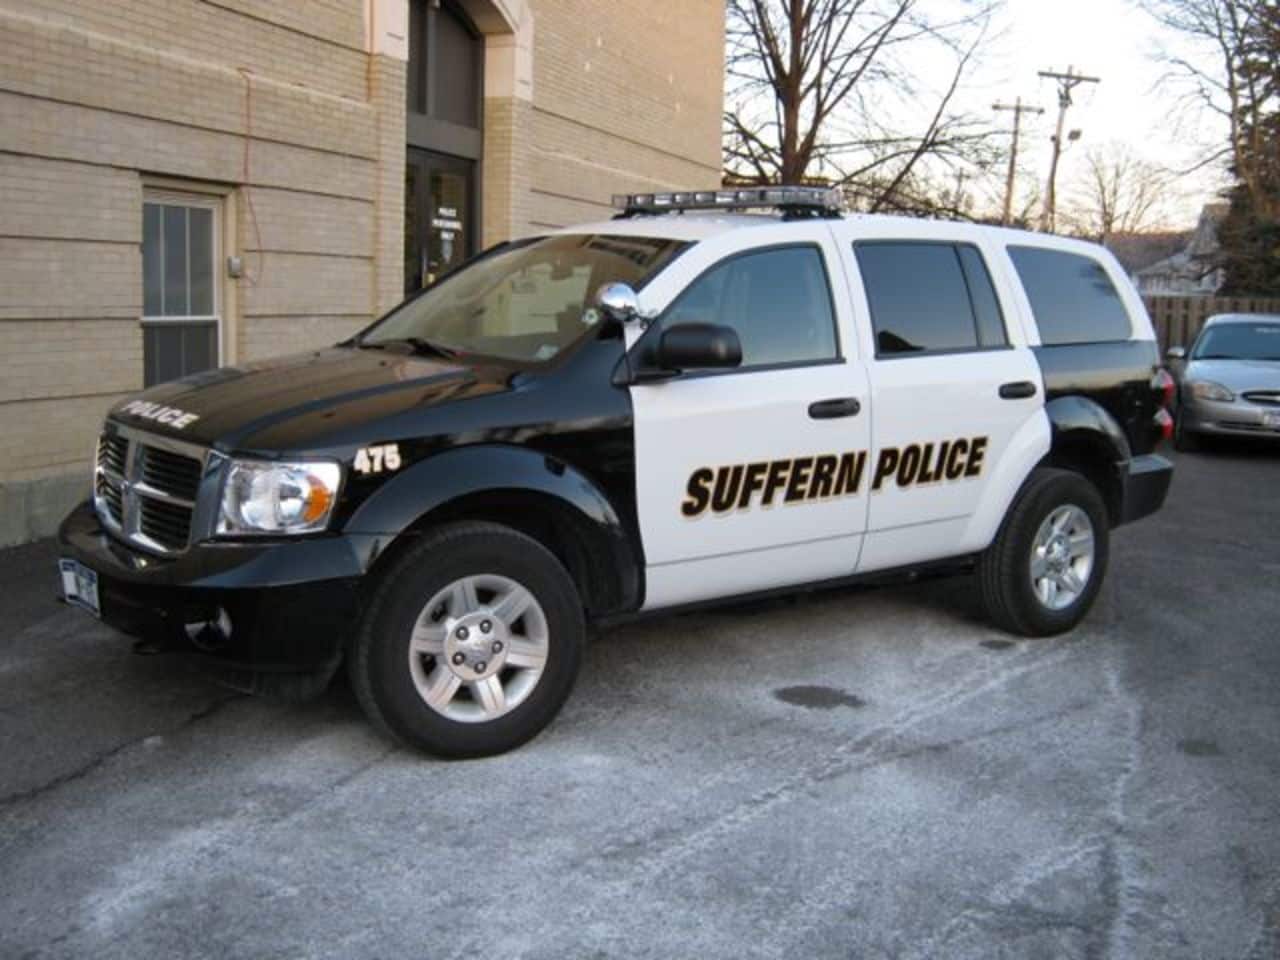 Suffern police said they charged an 18-year-old village man with violating an order of protection.